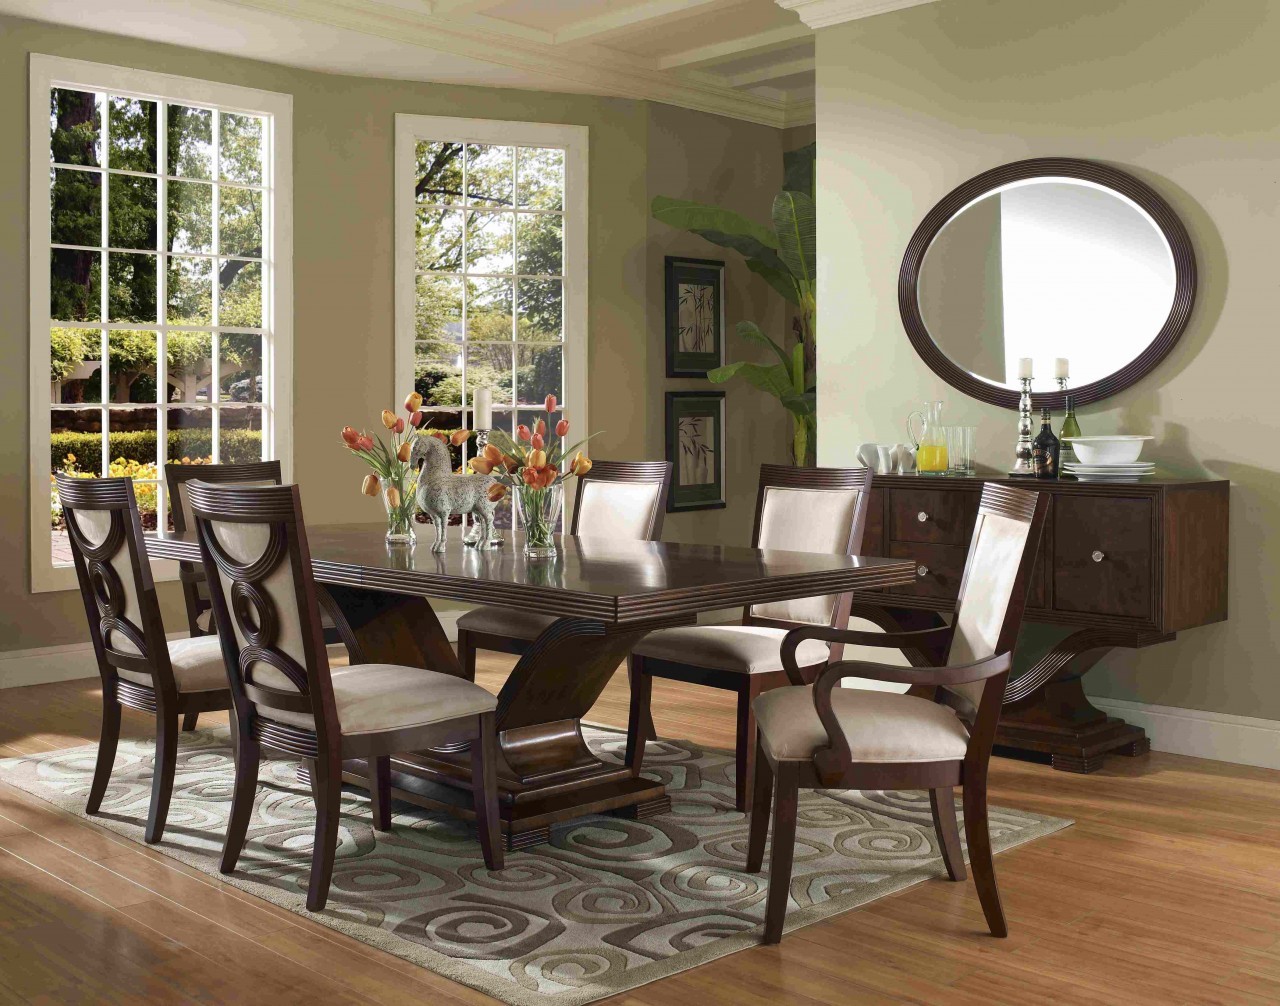 Formal dining room collections